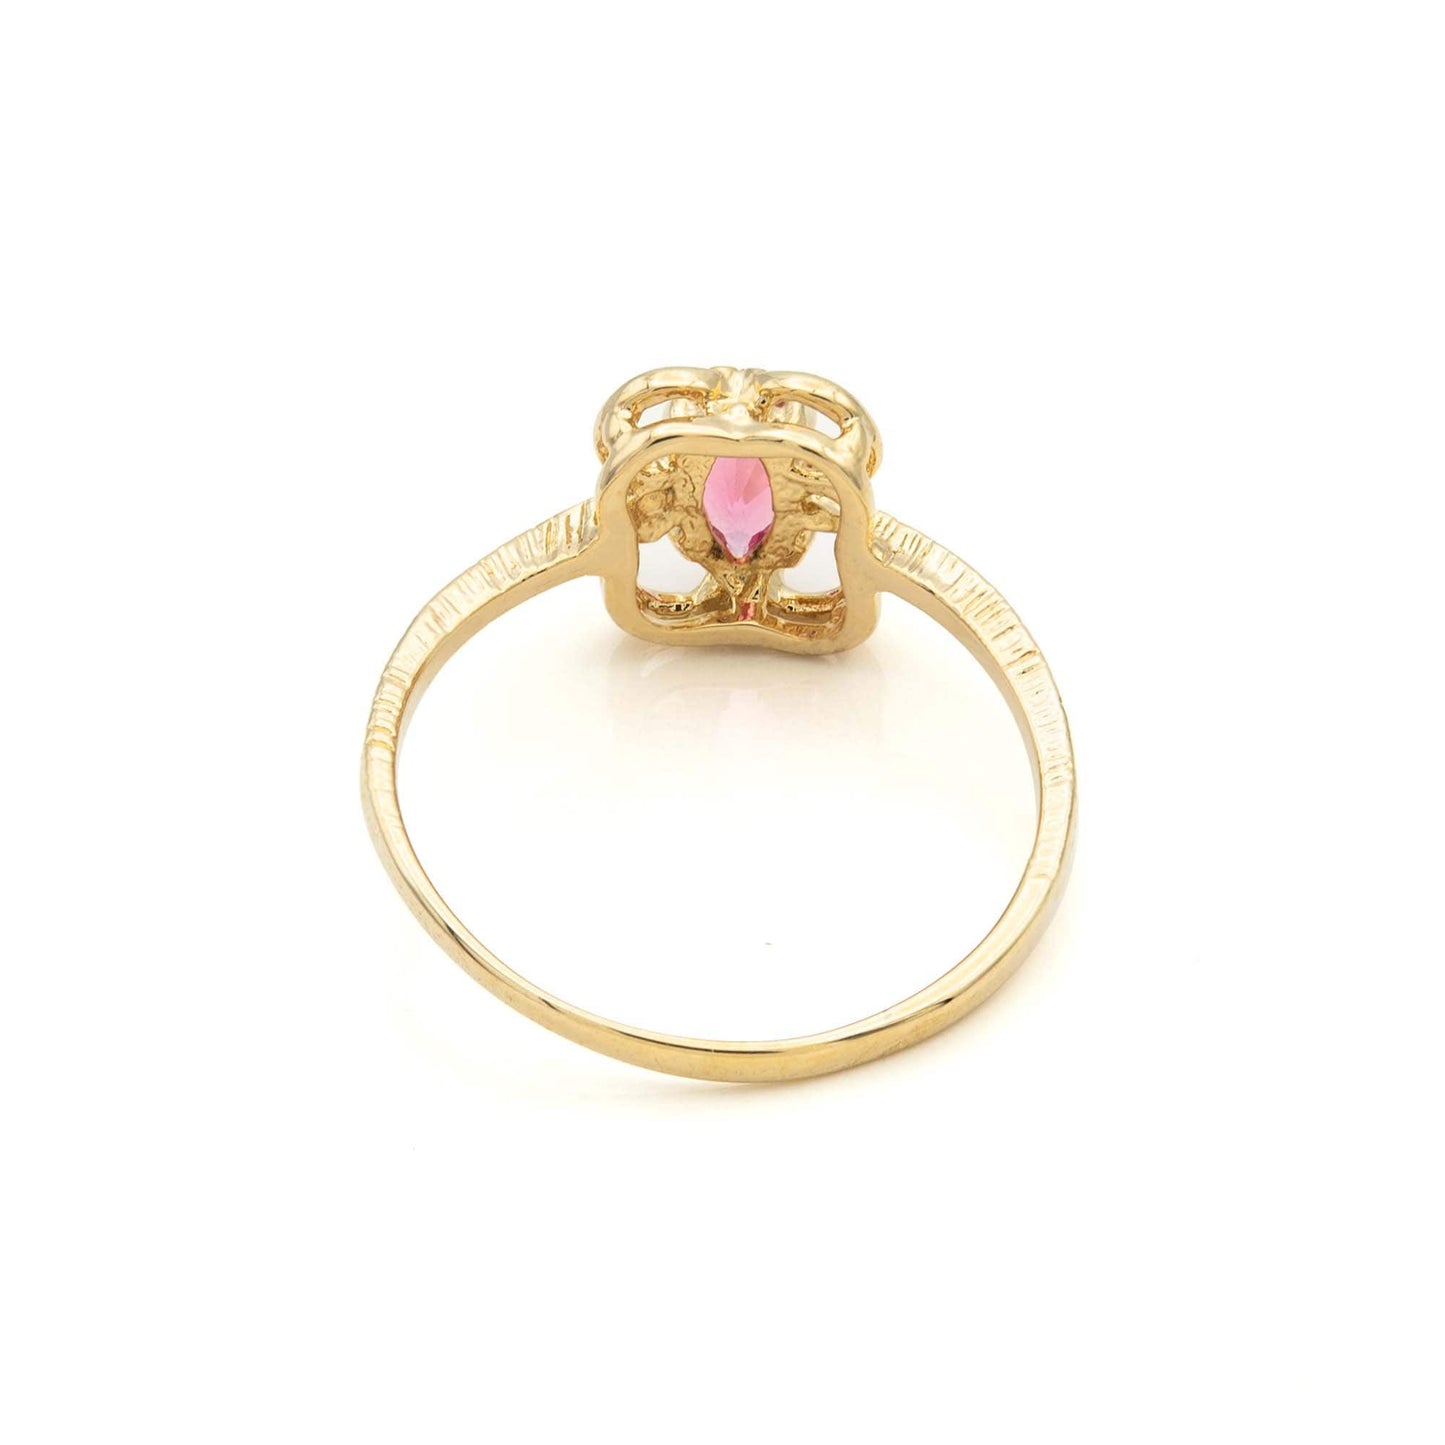 Vintage Ring Pink Tourmaline Austrian Crystal Ring 18k Gold Made in the USA R586 - Limited Stock - Never Worn